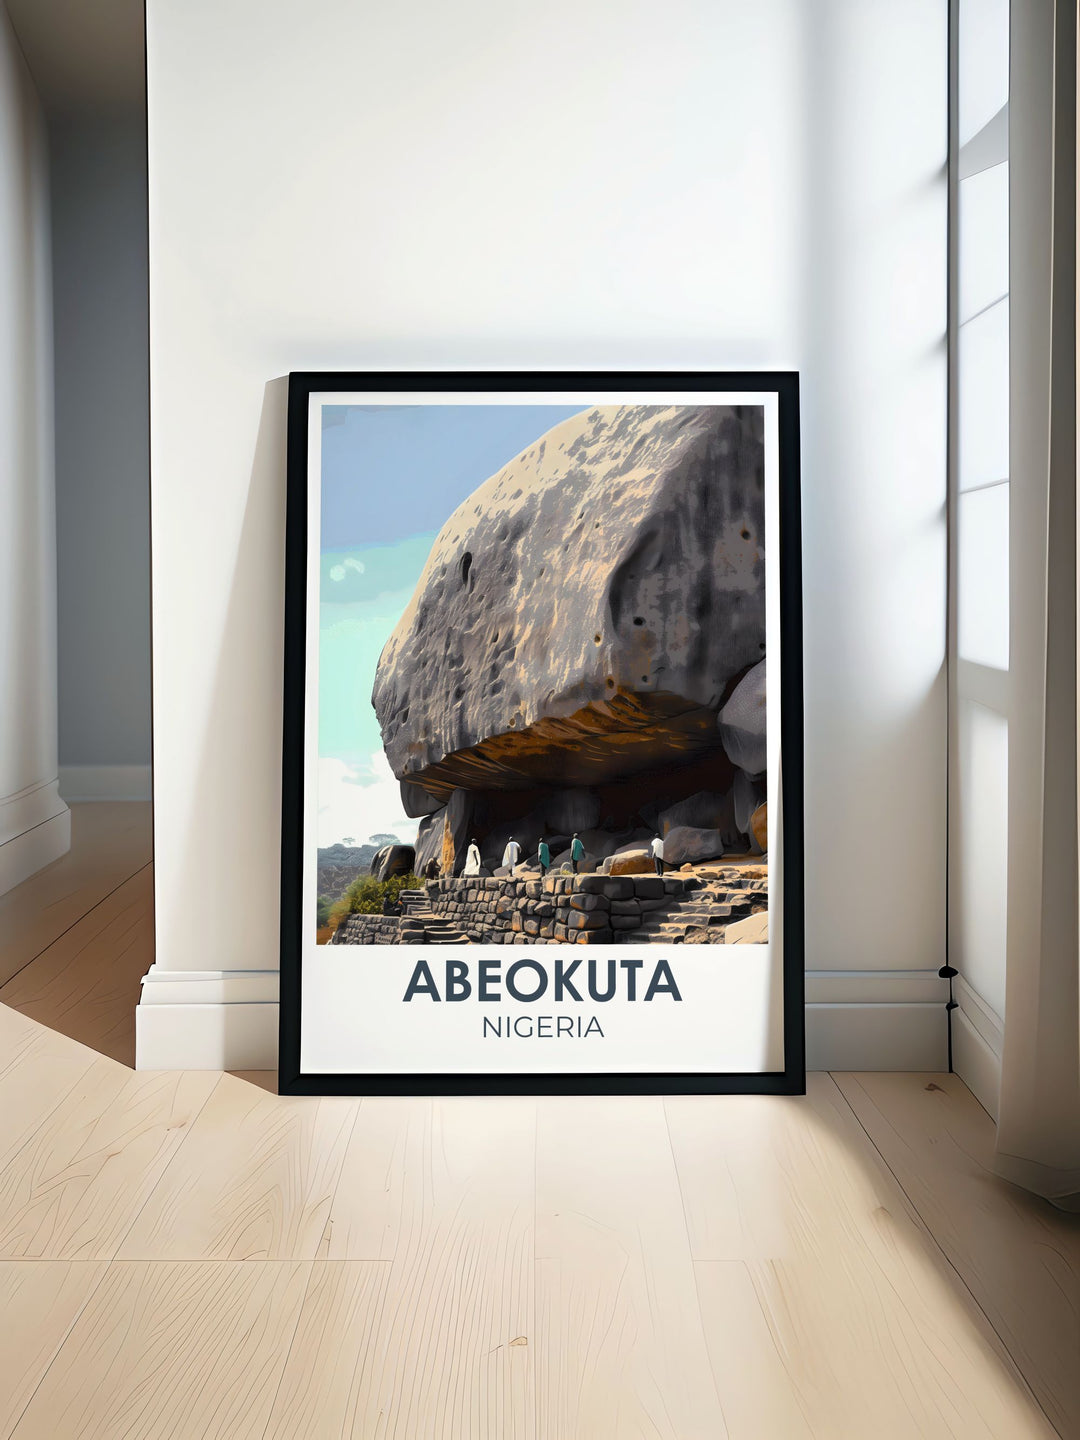 a poster of a rock formation in a room